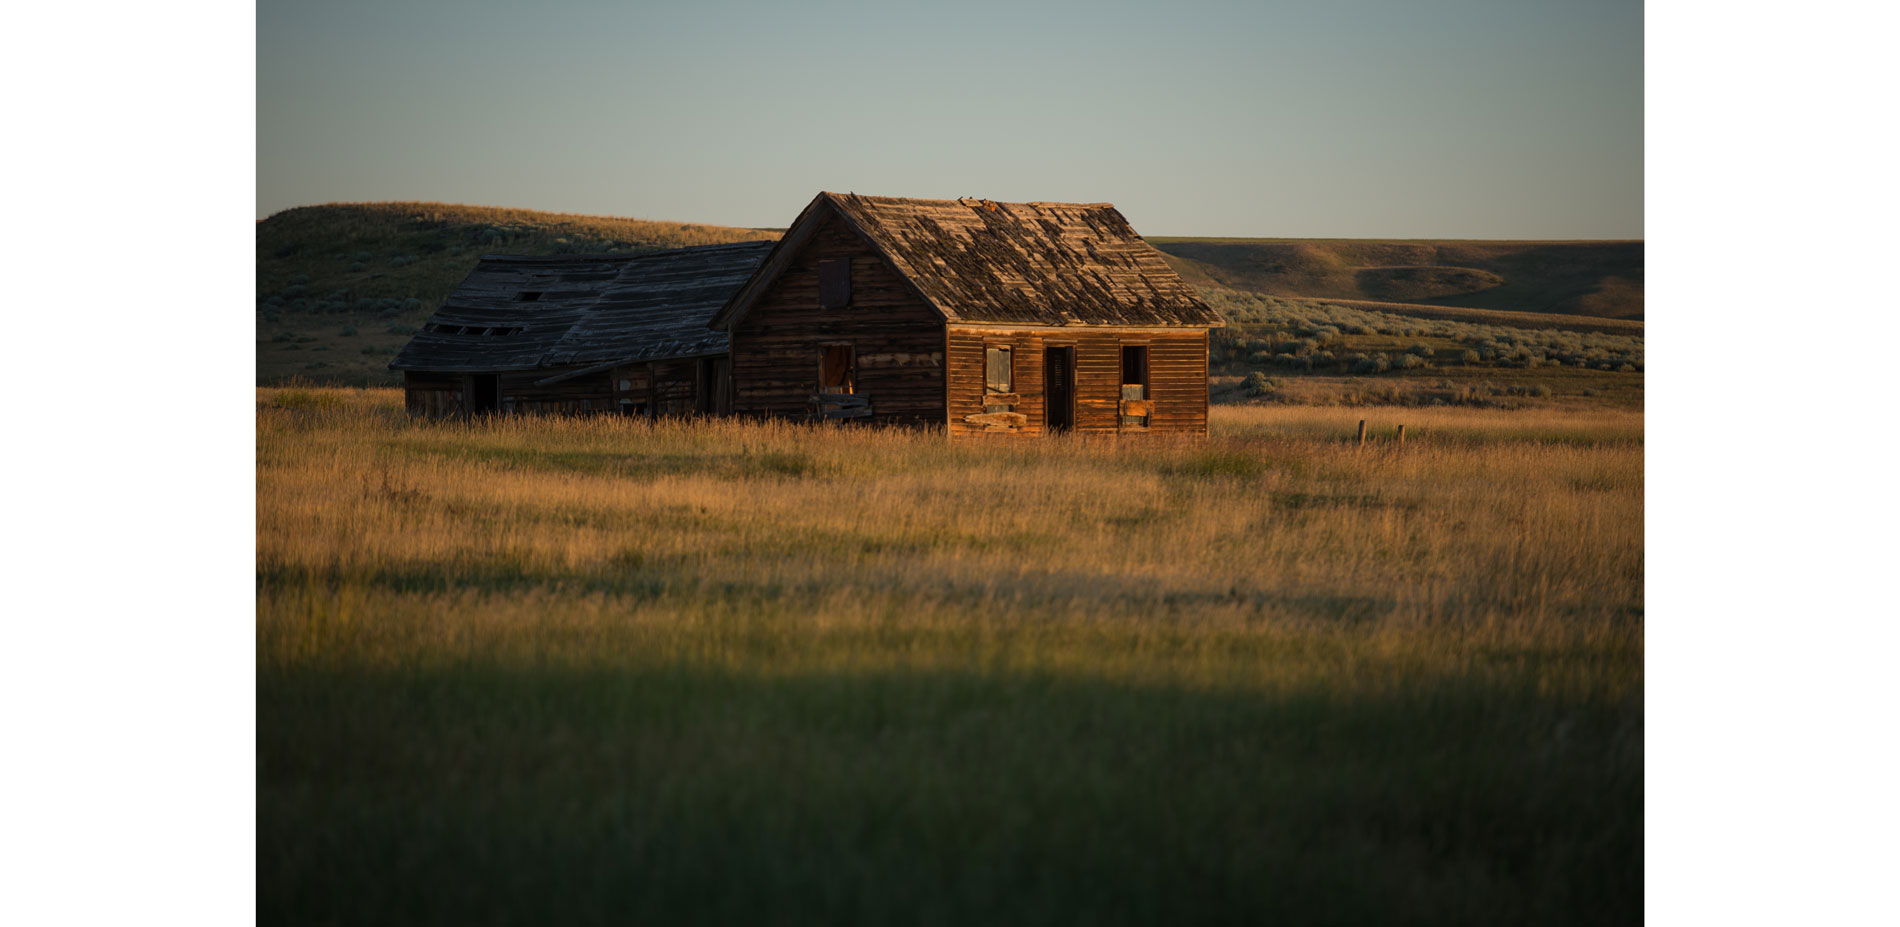 The remnants of 19th-Century homesteaders are etched on the land. The vernacular architecture, windbreaks, and pasture fences informed the aesthetics …